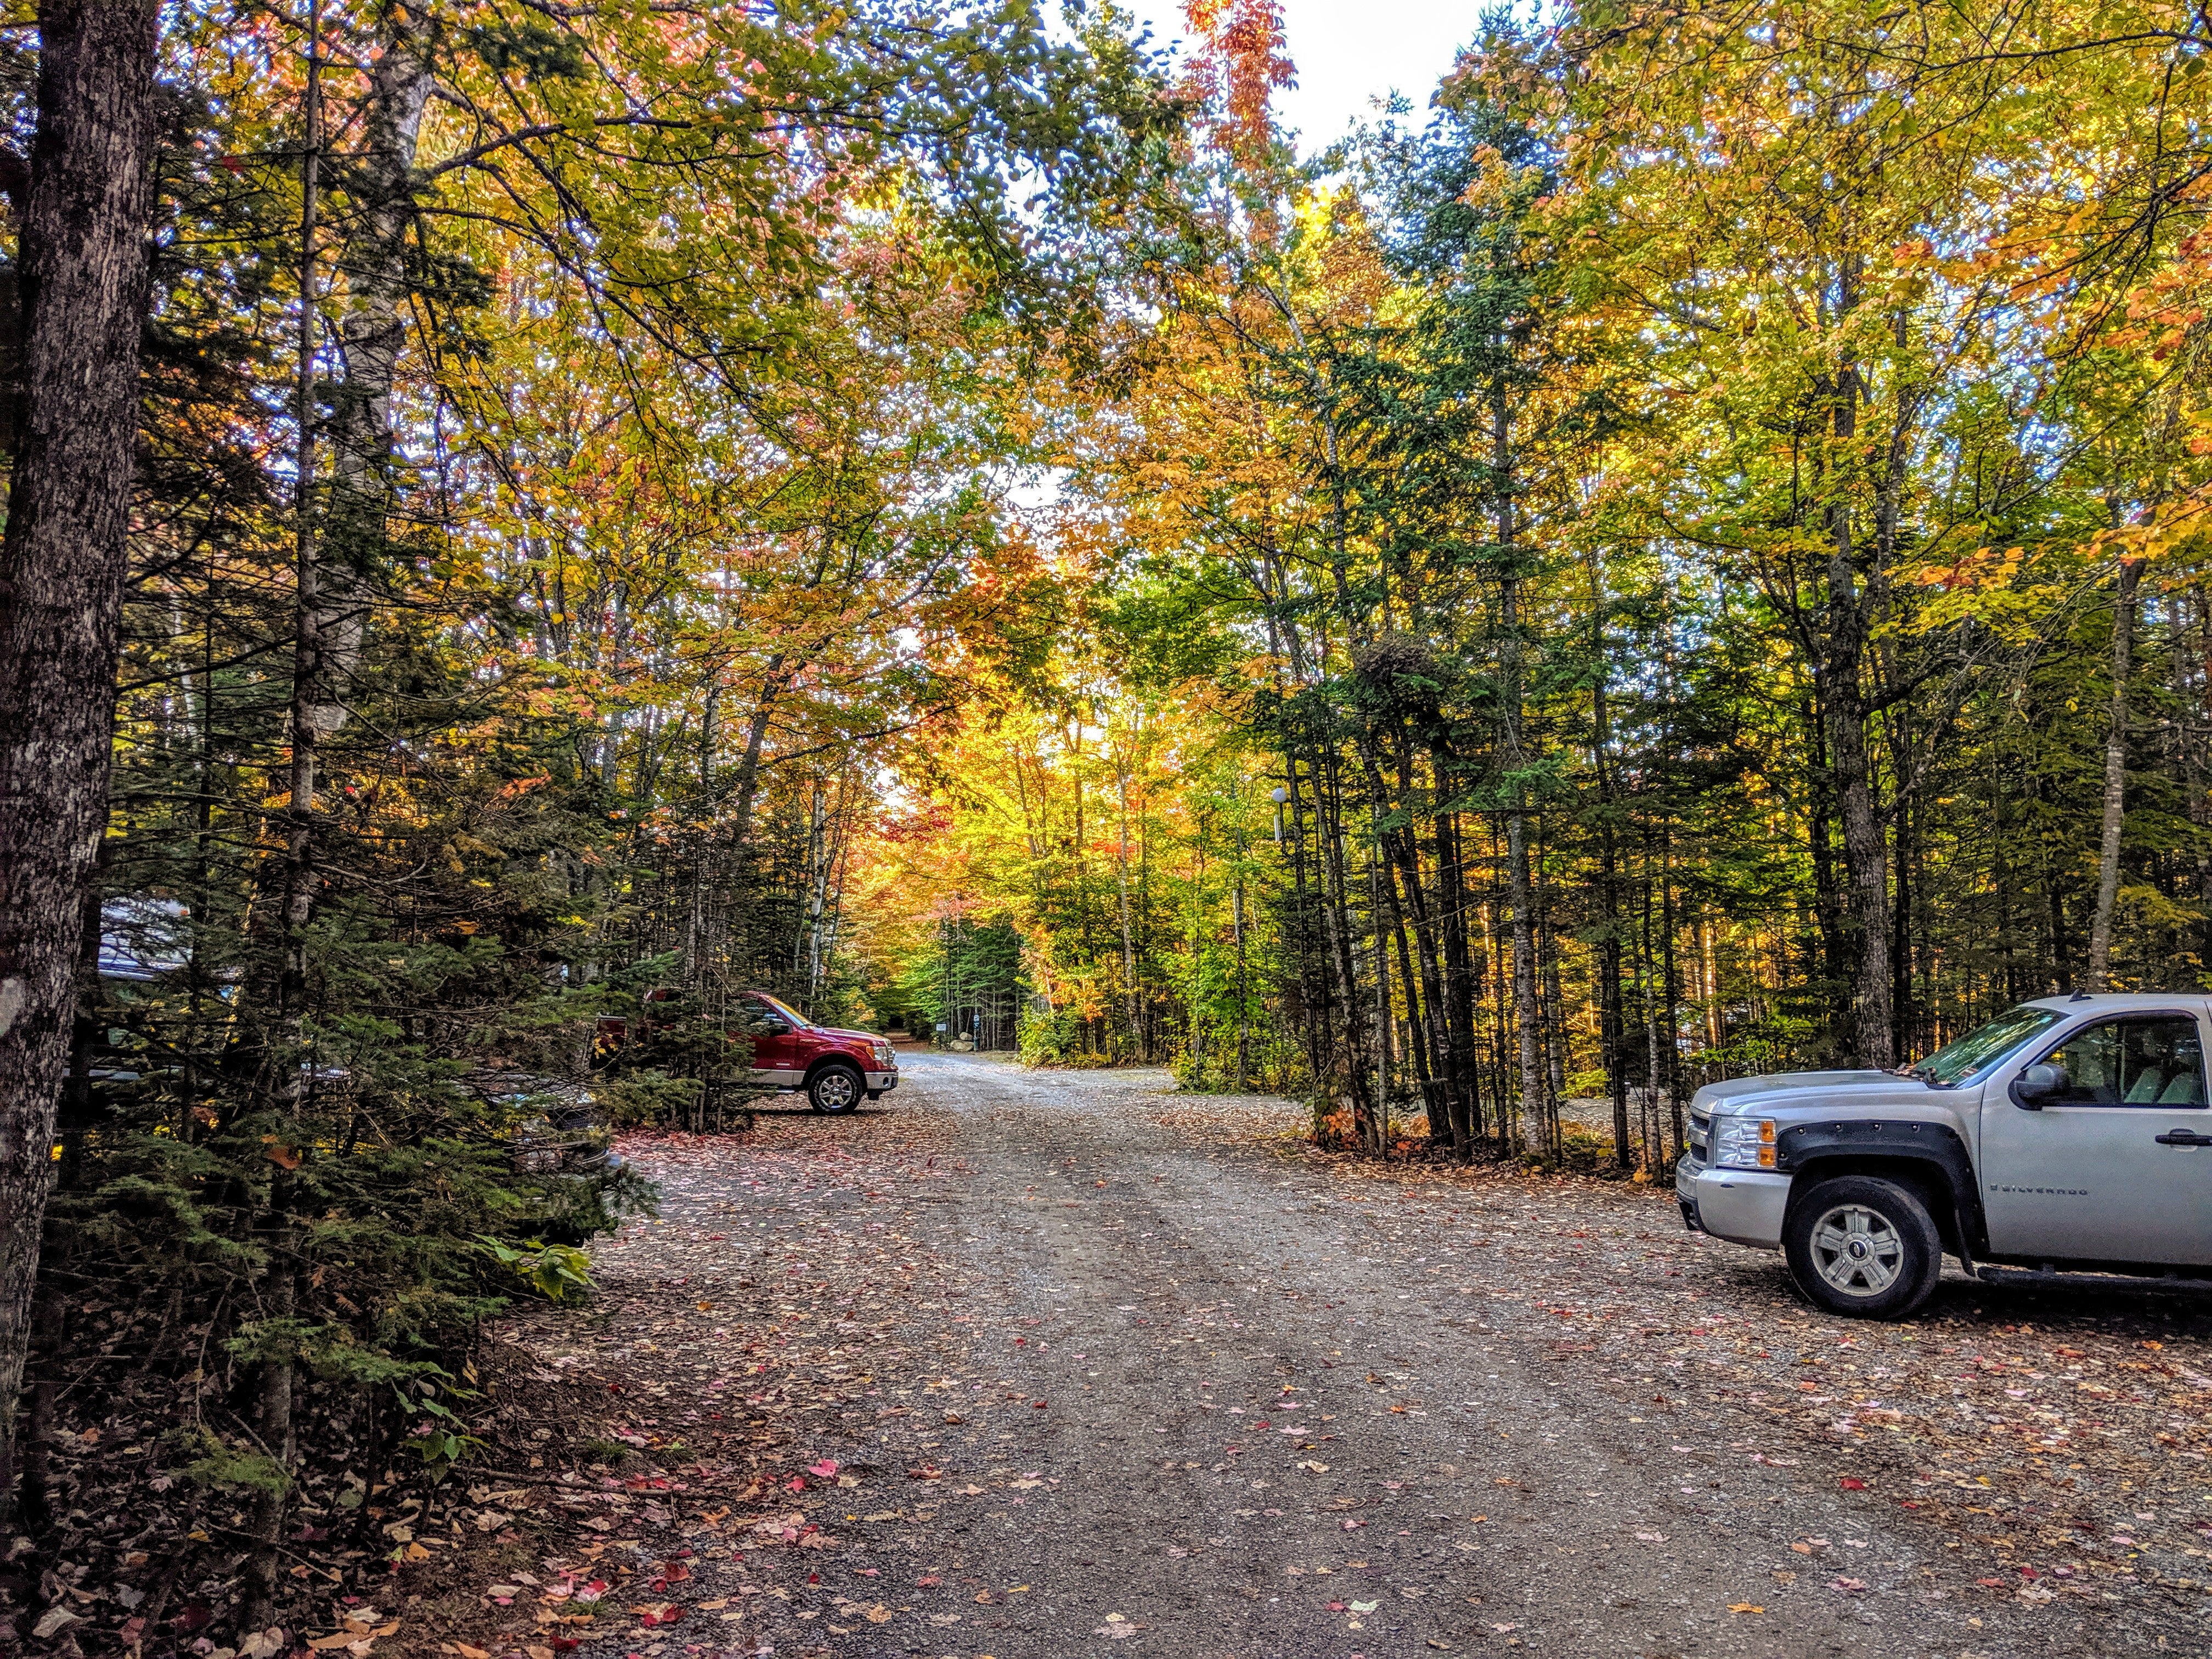 A view down the main road of the campground.